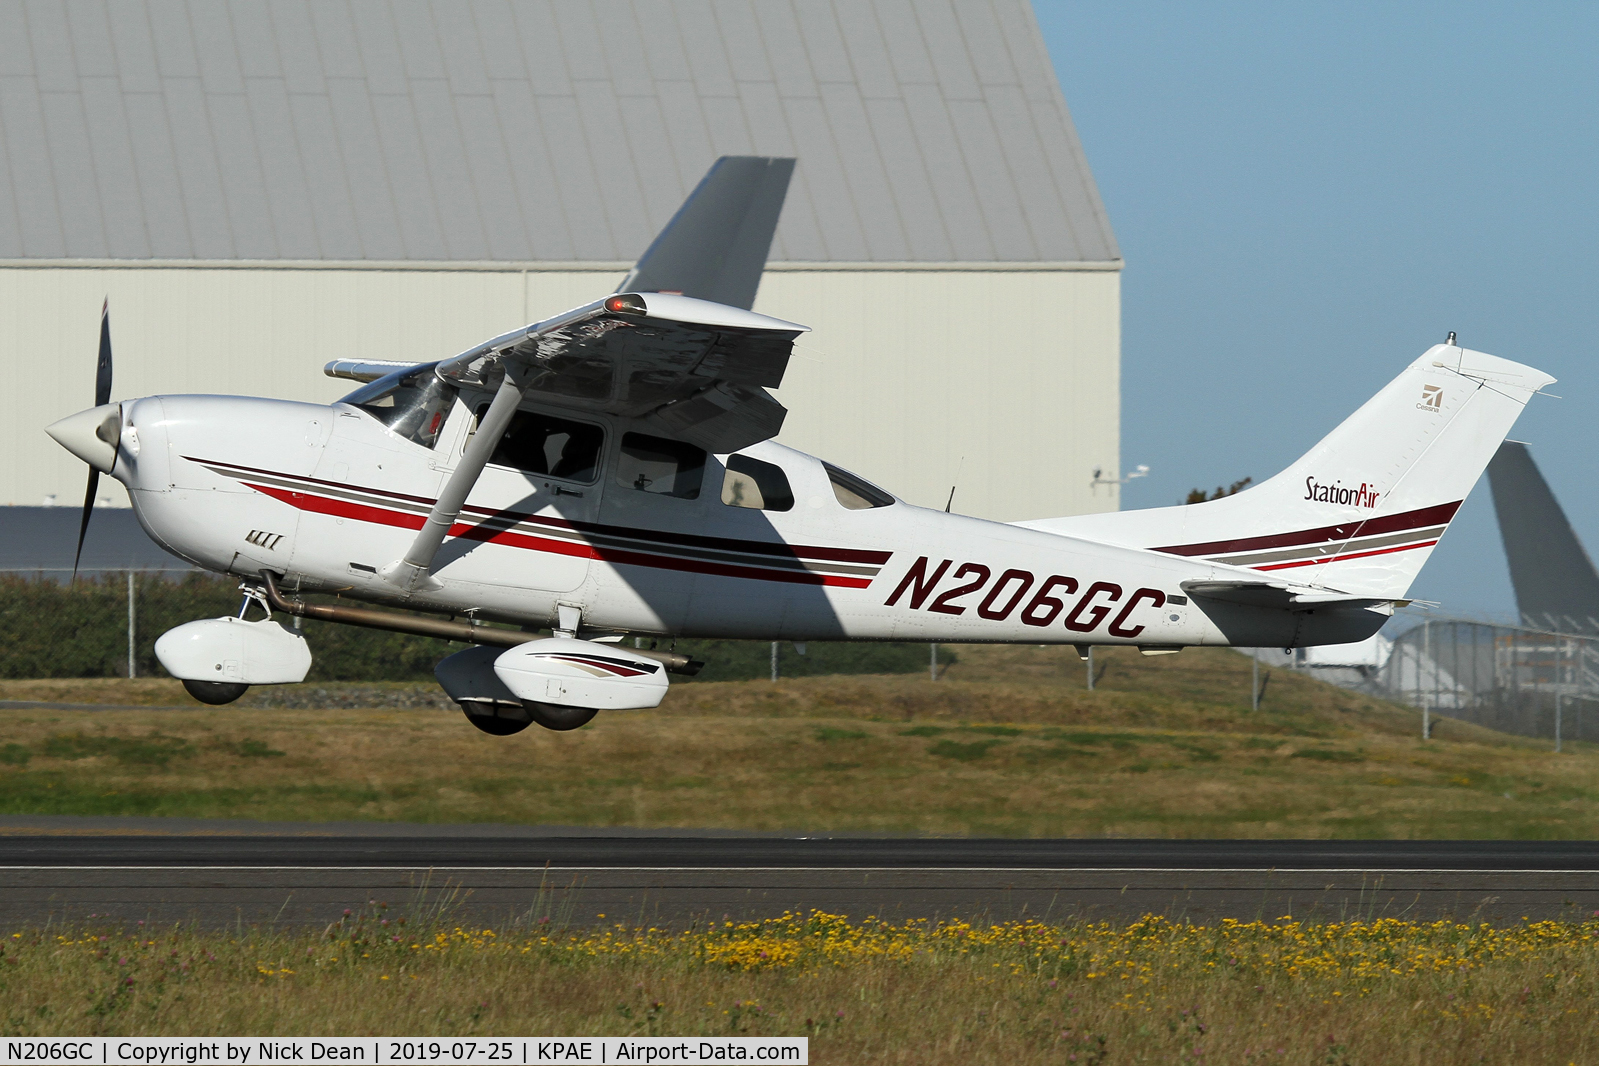 N206GC, 2002 Cessna 206H Stationair C/N 20608001, Something strange about this aircraft using the call sign 